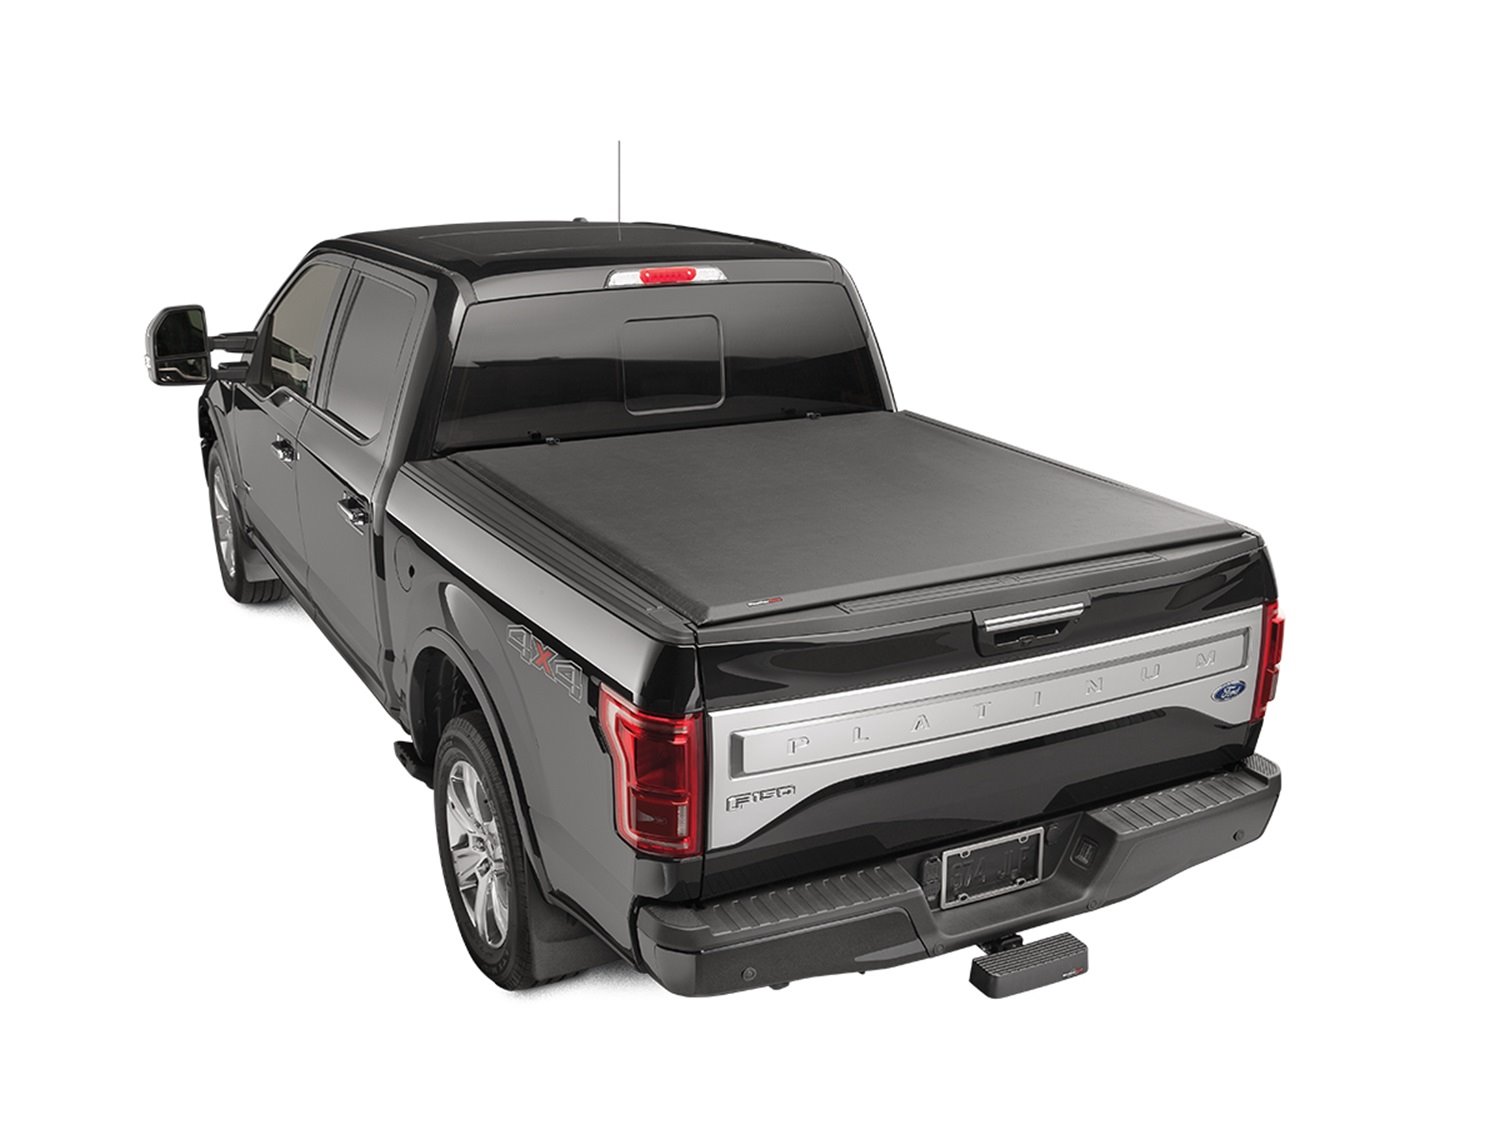 ROLL UP TRUCK BED COVER B DODGE RAM 2012-2017 RAM 6 4 BED W/ RAMBOX